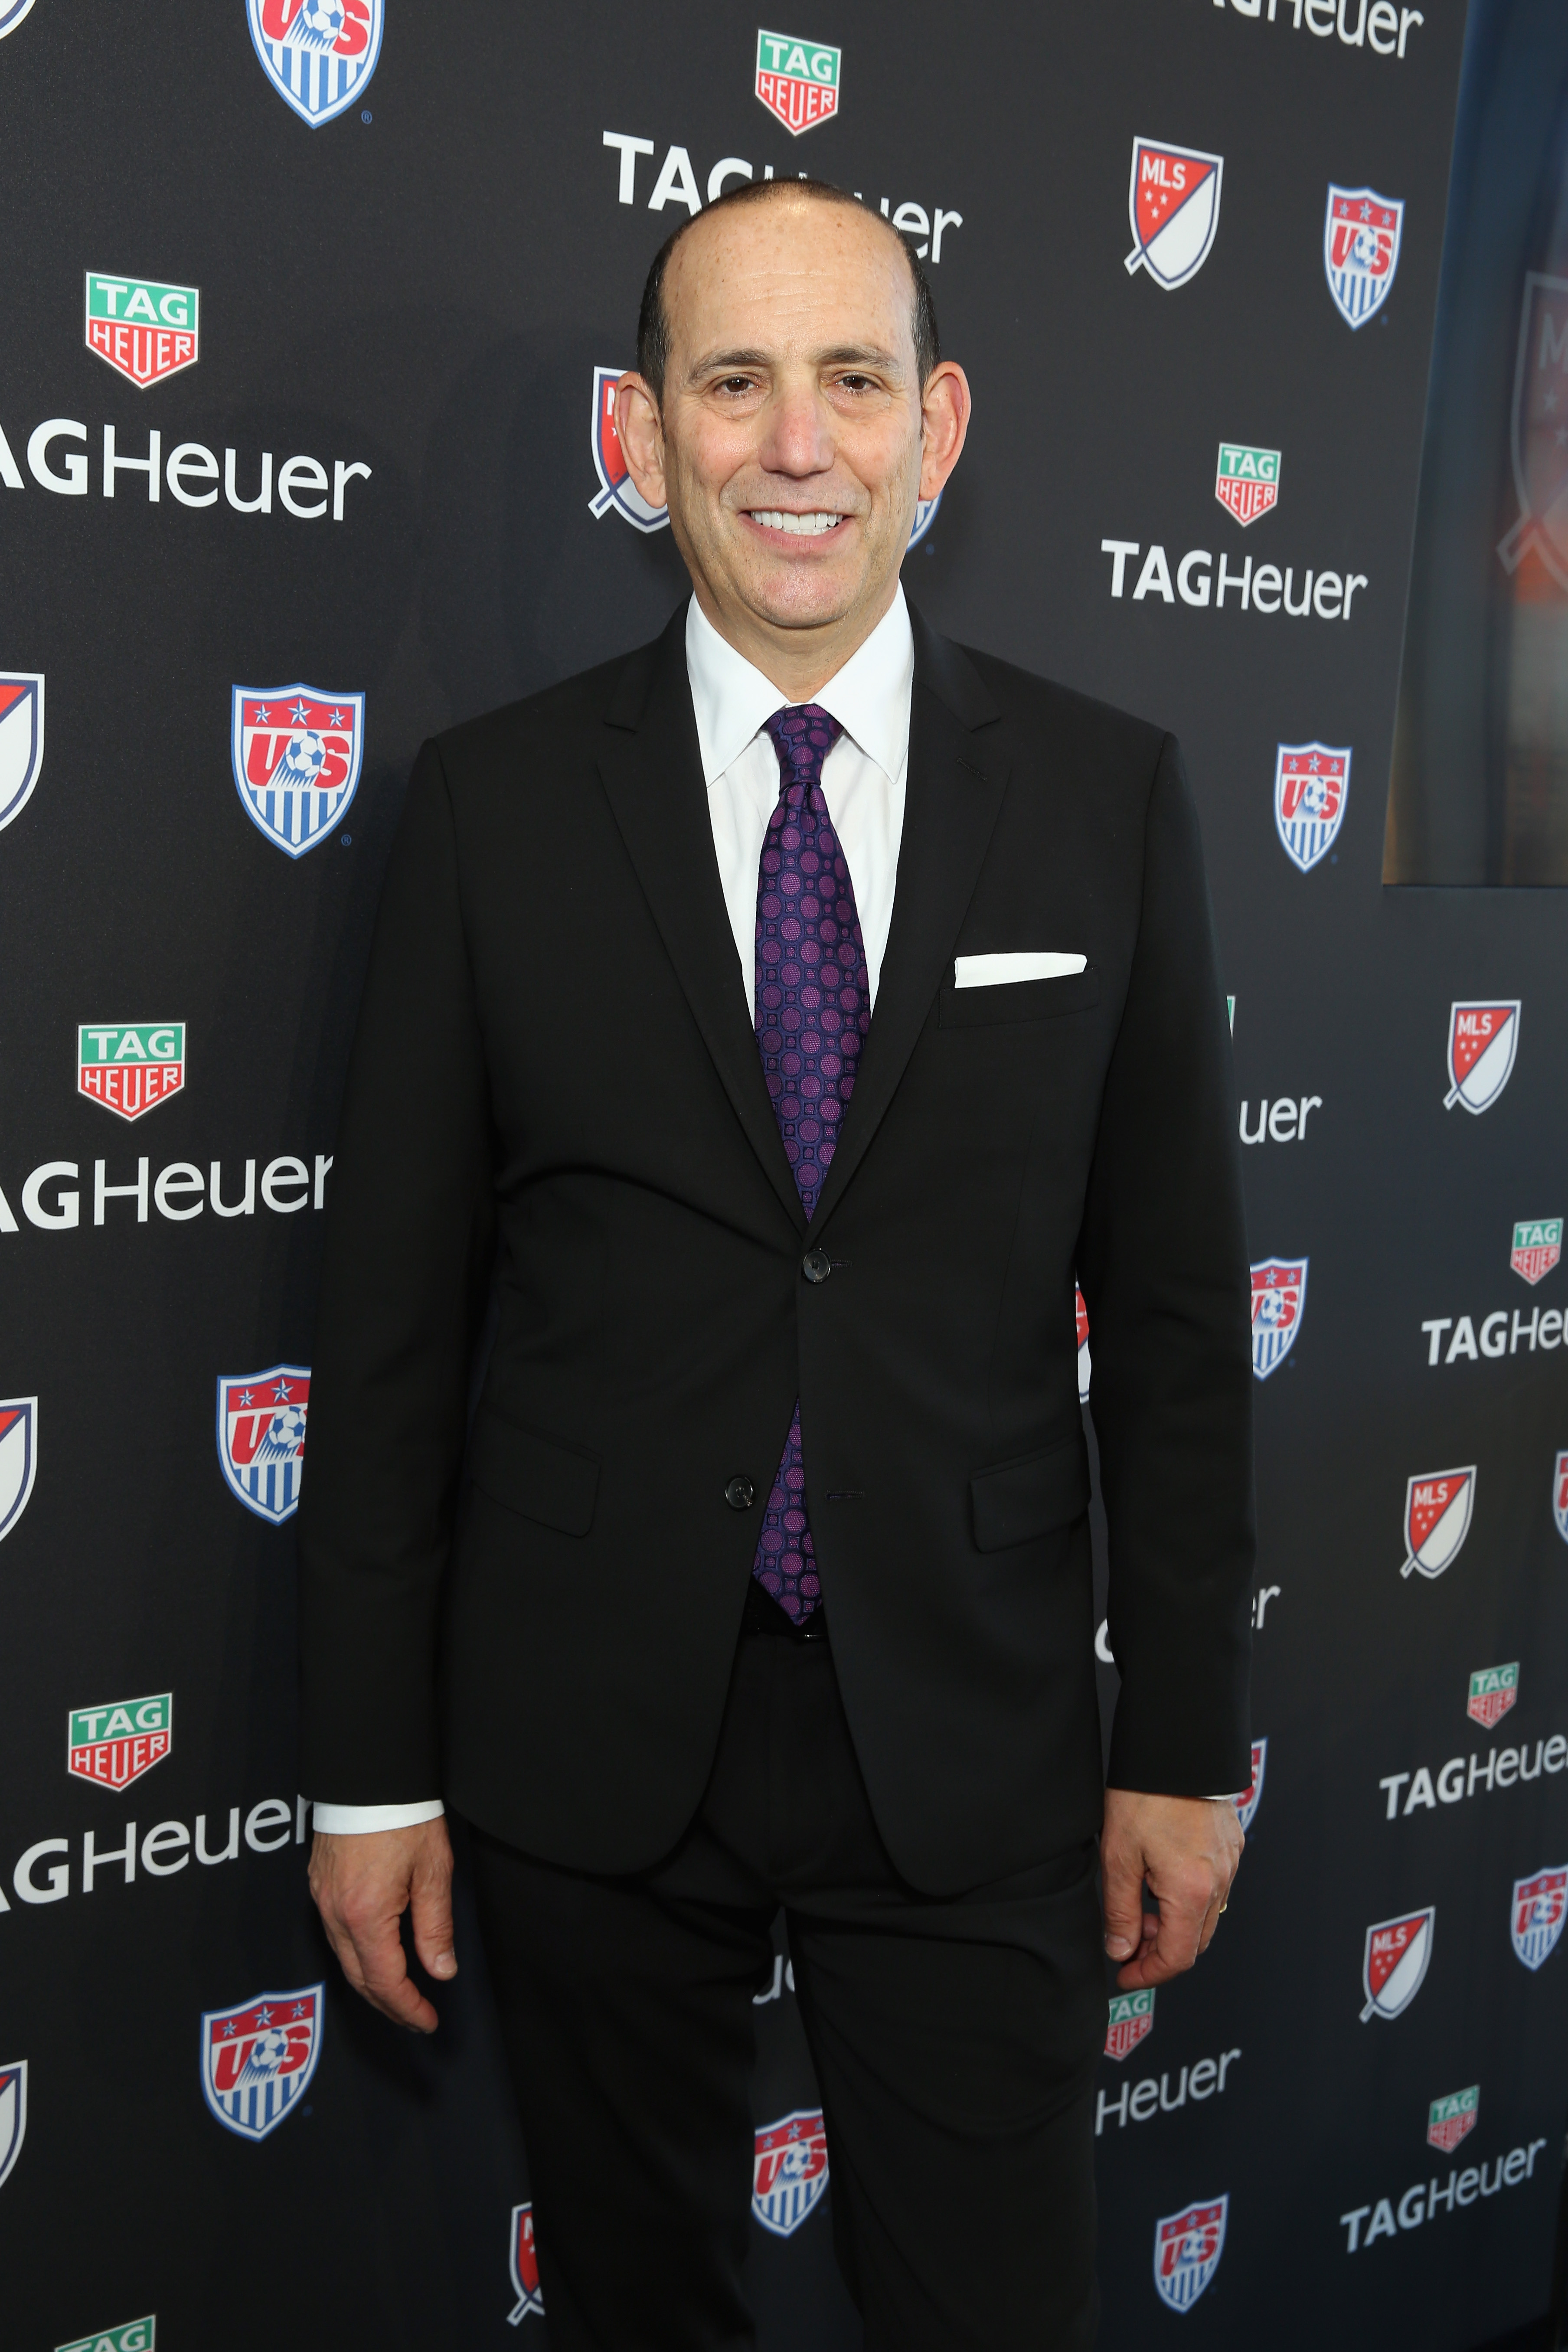 Tag Heuer Makes History With Major League Soccer And US Soccer Partnerships